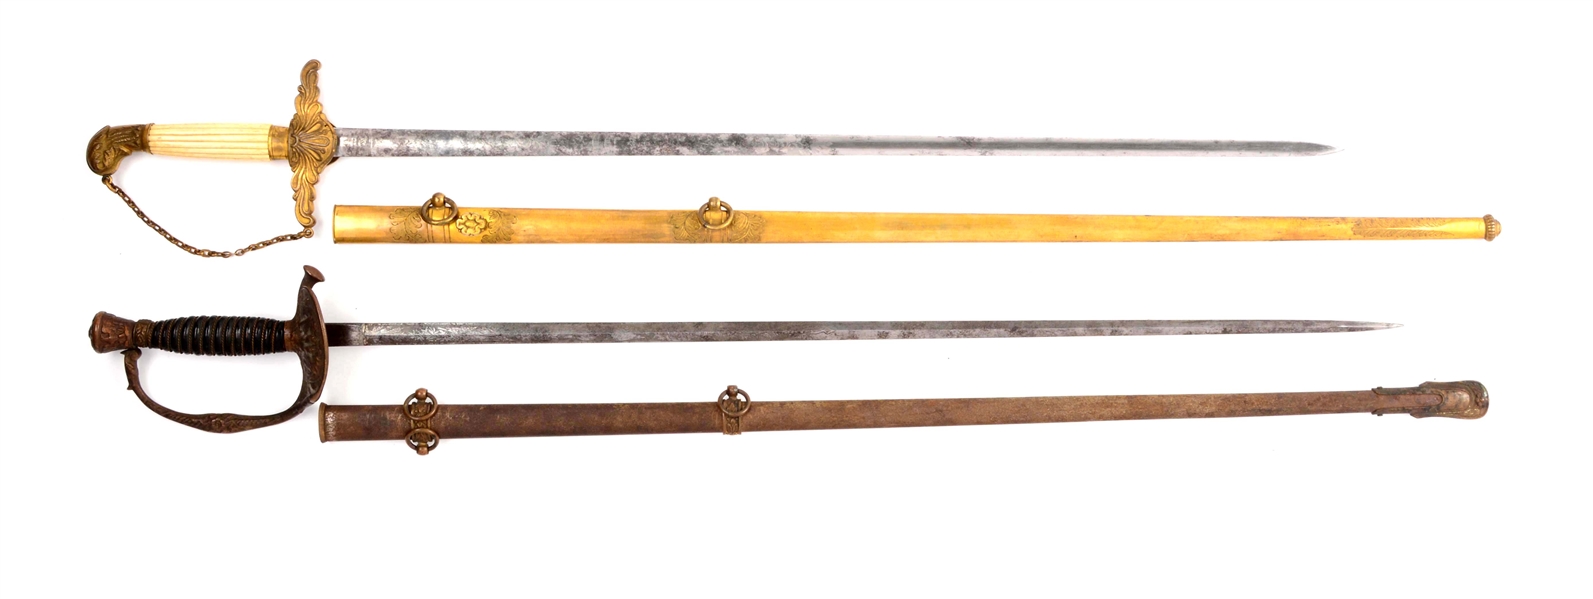 LOT OF 2: 1840 MILITIA OFFICERS SWORD AND 1860 STAFF & FIELD SWORD.